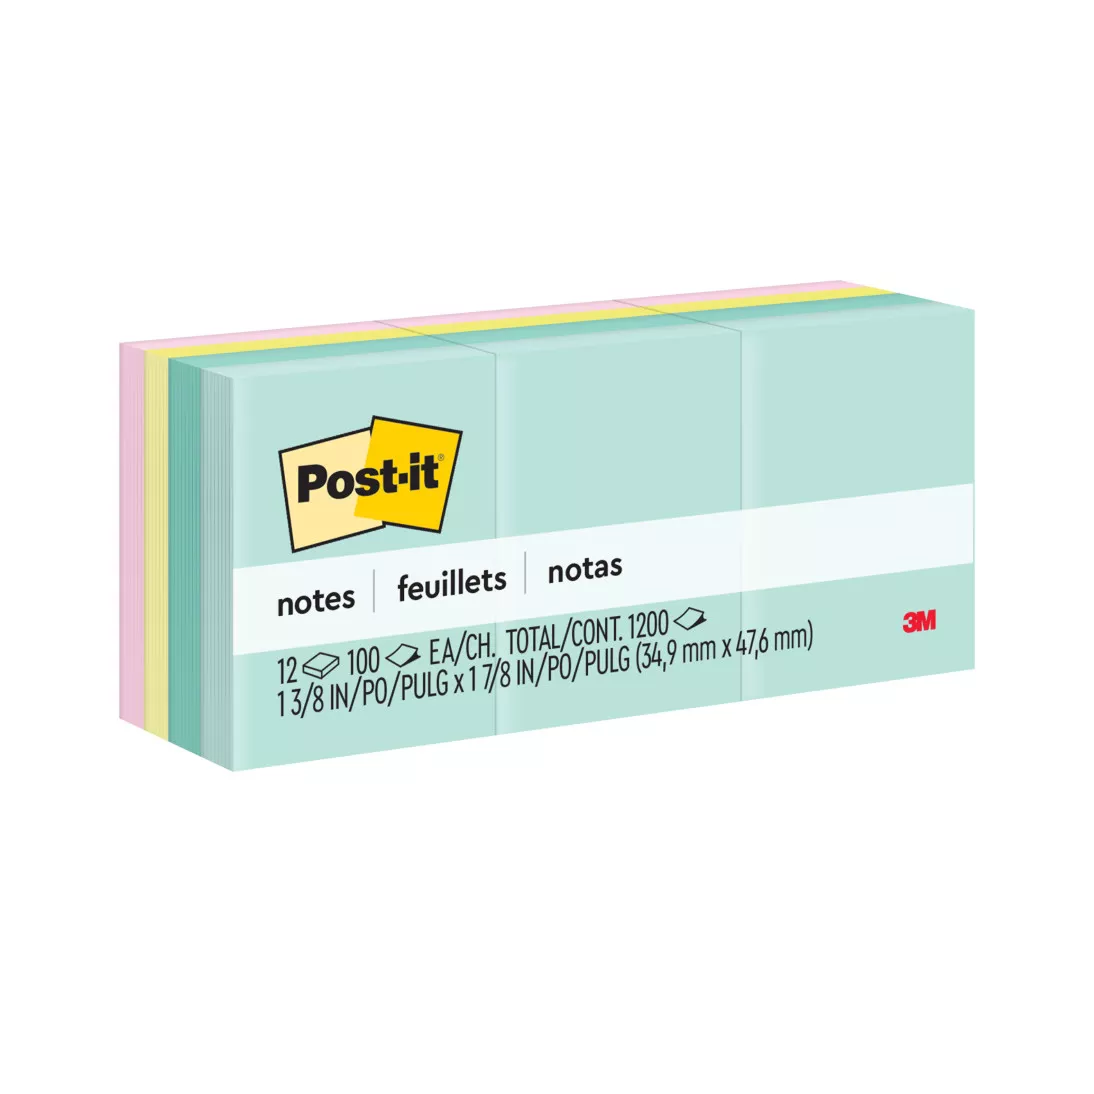 Post-it® Notes 653-AST, 1-3/8 in x 1 7/8 in (34,9 mm x 47,6 mm) Marseille colors